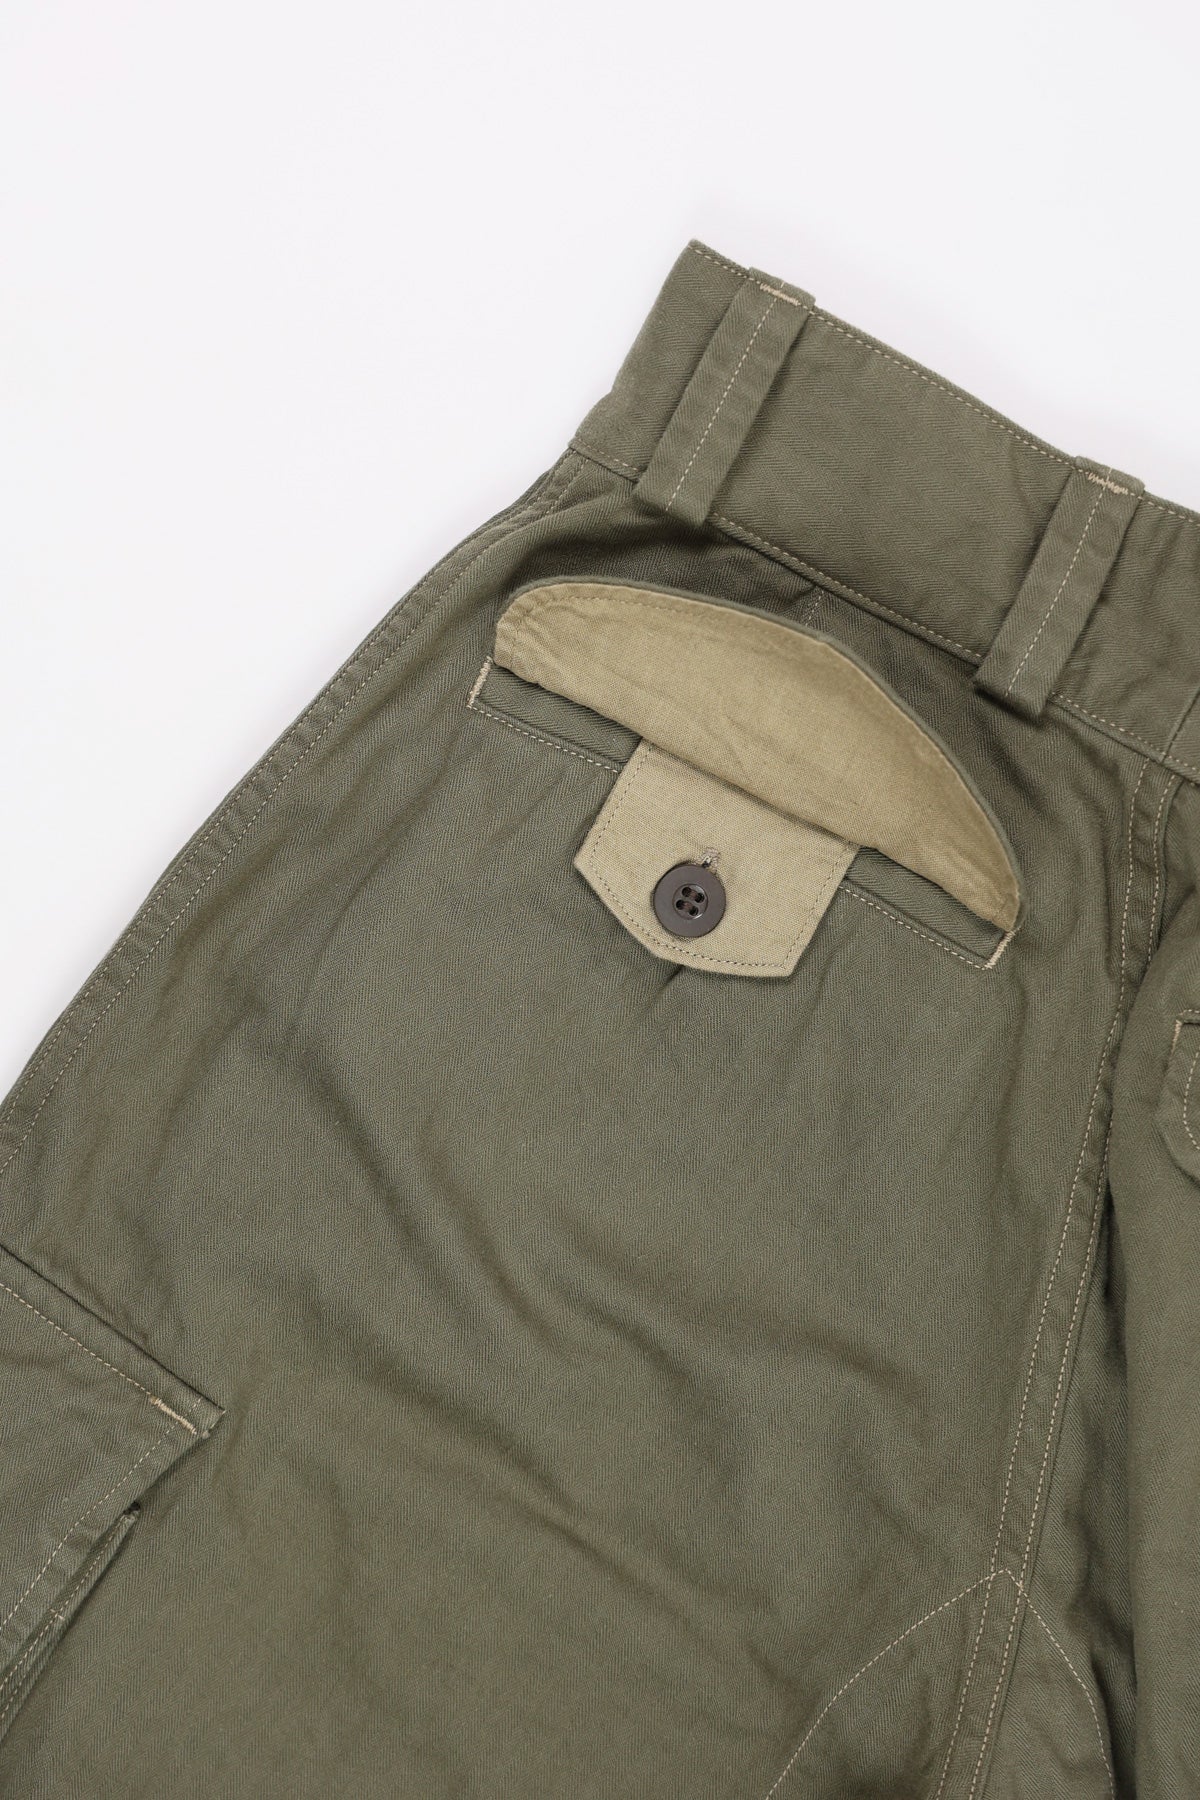 M-47 French Army Cargo Pants - Army Green